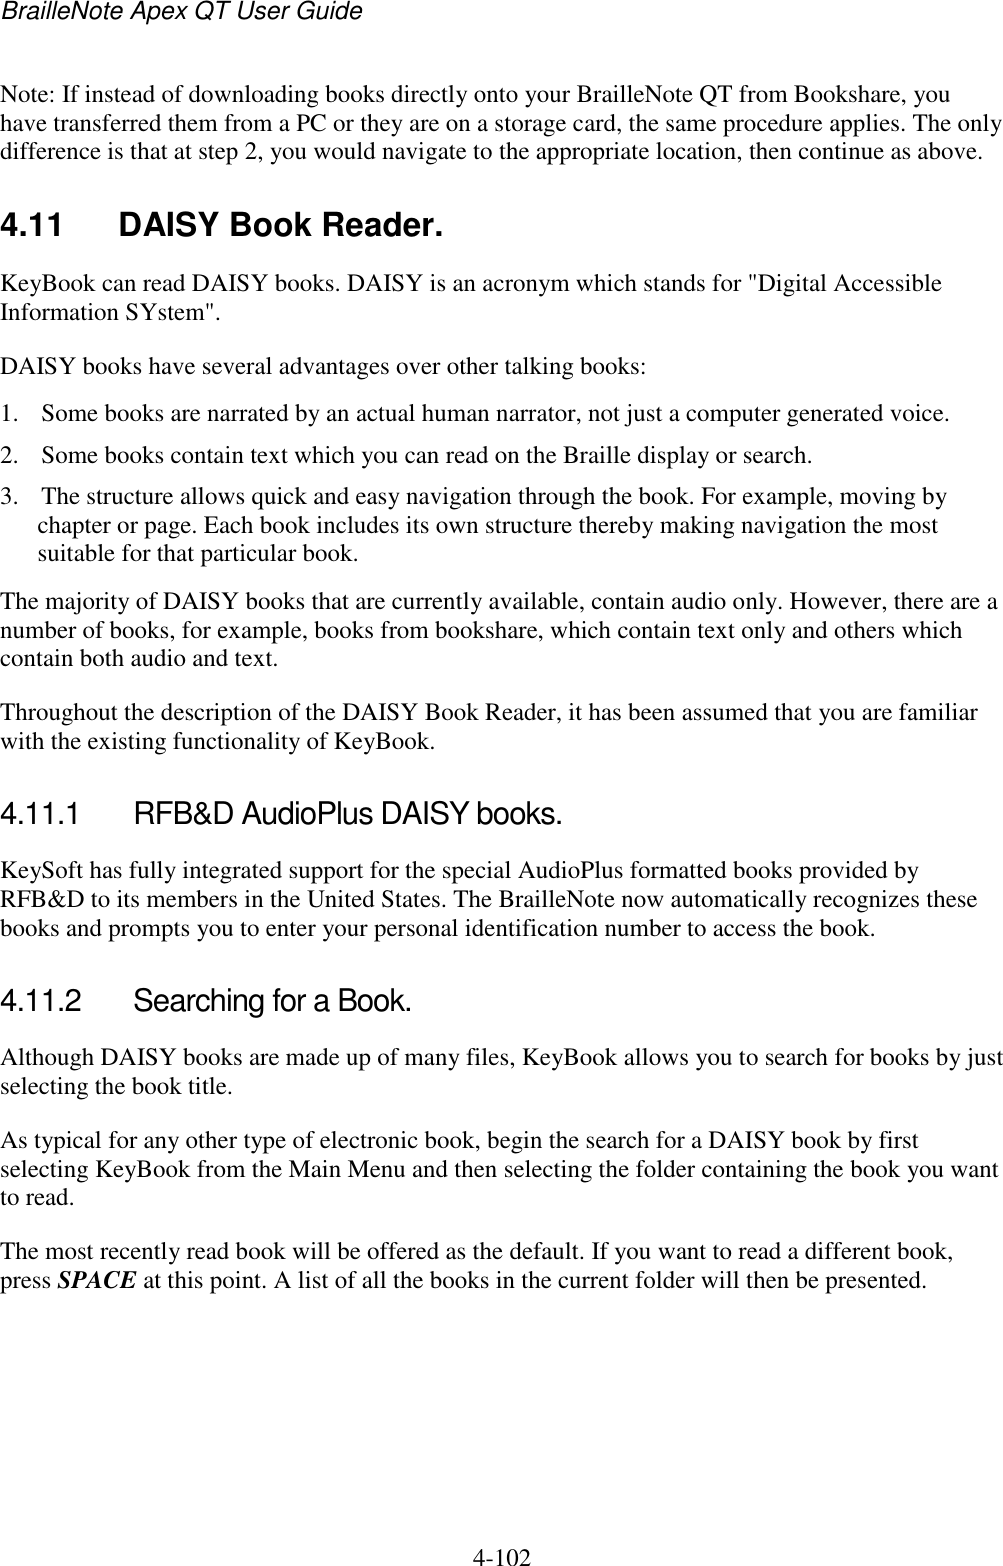 BrailleNote Apex QT User Guide  4-102   Note: If instead of downloading books directly onto your BrailleNote QT from Bookshare, you have transferred them from a PC or they are on a storage card, the same procedure applies. The only difference is that at step 2, you would navigate to the appropriate location, then continue as above.  4.11  DAISY Book Reader. KeyBook can read DAISY books. DAISY is an acronym which stands for &quot;Digital Accessible Information SYstem&quot;. DAISY books have several advantages over other talking books: 1. Some books are narrated by an actual human narrator, not just a computer generated voice. 2. Some books contain text which you can read on the Braille display or search. 3. The structure allows quick and easy navigation through the book. For example, moving by chapter or page. Each book includes its own structure thereby making navigation the most suitable for that particular book. The majority of DAISY books that are currently available, contain audio only. However, there are a number of books, for example, books from bookshare, which contain text only and others which contain both audio and text.  Throughout the description of the DAISY Book Reader, it has been assumed that you are familiar with the existing functionality of KeyBook.  4.11.1  RFB&amp;D AudioPlus DAISY books. KeySoft has fully integrated support for the special AudioPlus formatted books provided by RFB&amp;D to its members in the United States. The BrailleNote now automatically recognizes these books and prompts you to enter your personal identification number to access the book.  4.11.2  Searching for a Book. Although DAISY books are made up of many files, KeyBook allows you to search for books by just selecting the book title.  As typical for any other type of electronic book, begin the search for a DAISY book by first selecting KeyBook from the Main Menu and then selecting the folder containing the book you want to read. The most recently read book will be offered as the default. If you want to read a different book, press SPACE at this point. A list of all the books in the current folder will then be presented.   